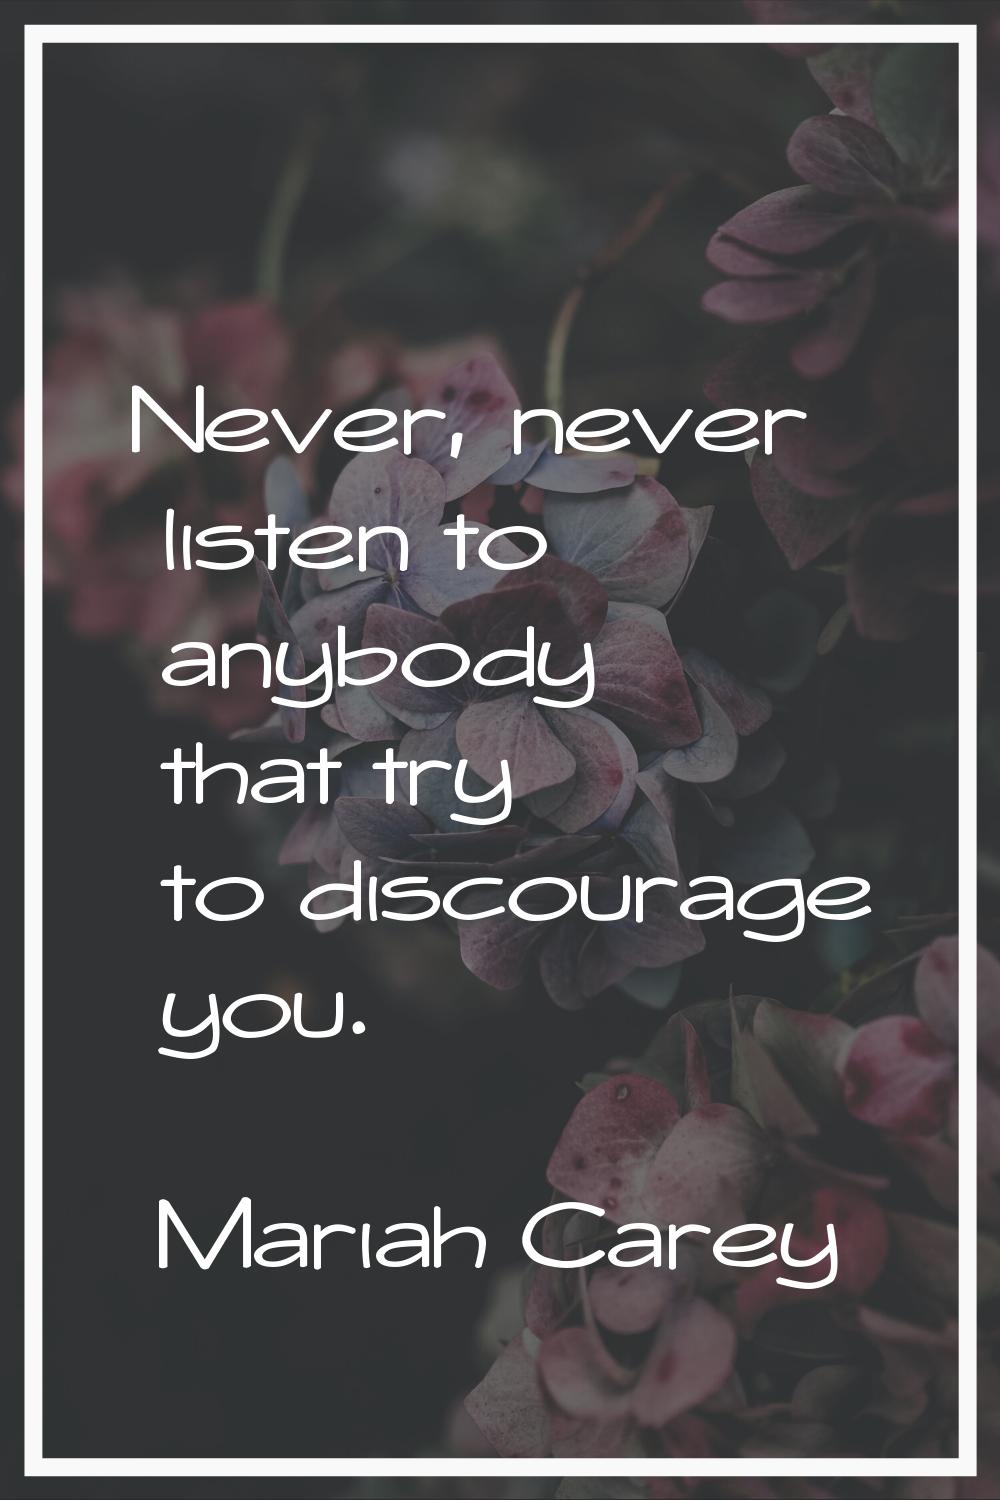 Never, never listen to anybody that try to discourage you.